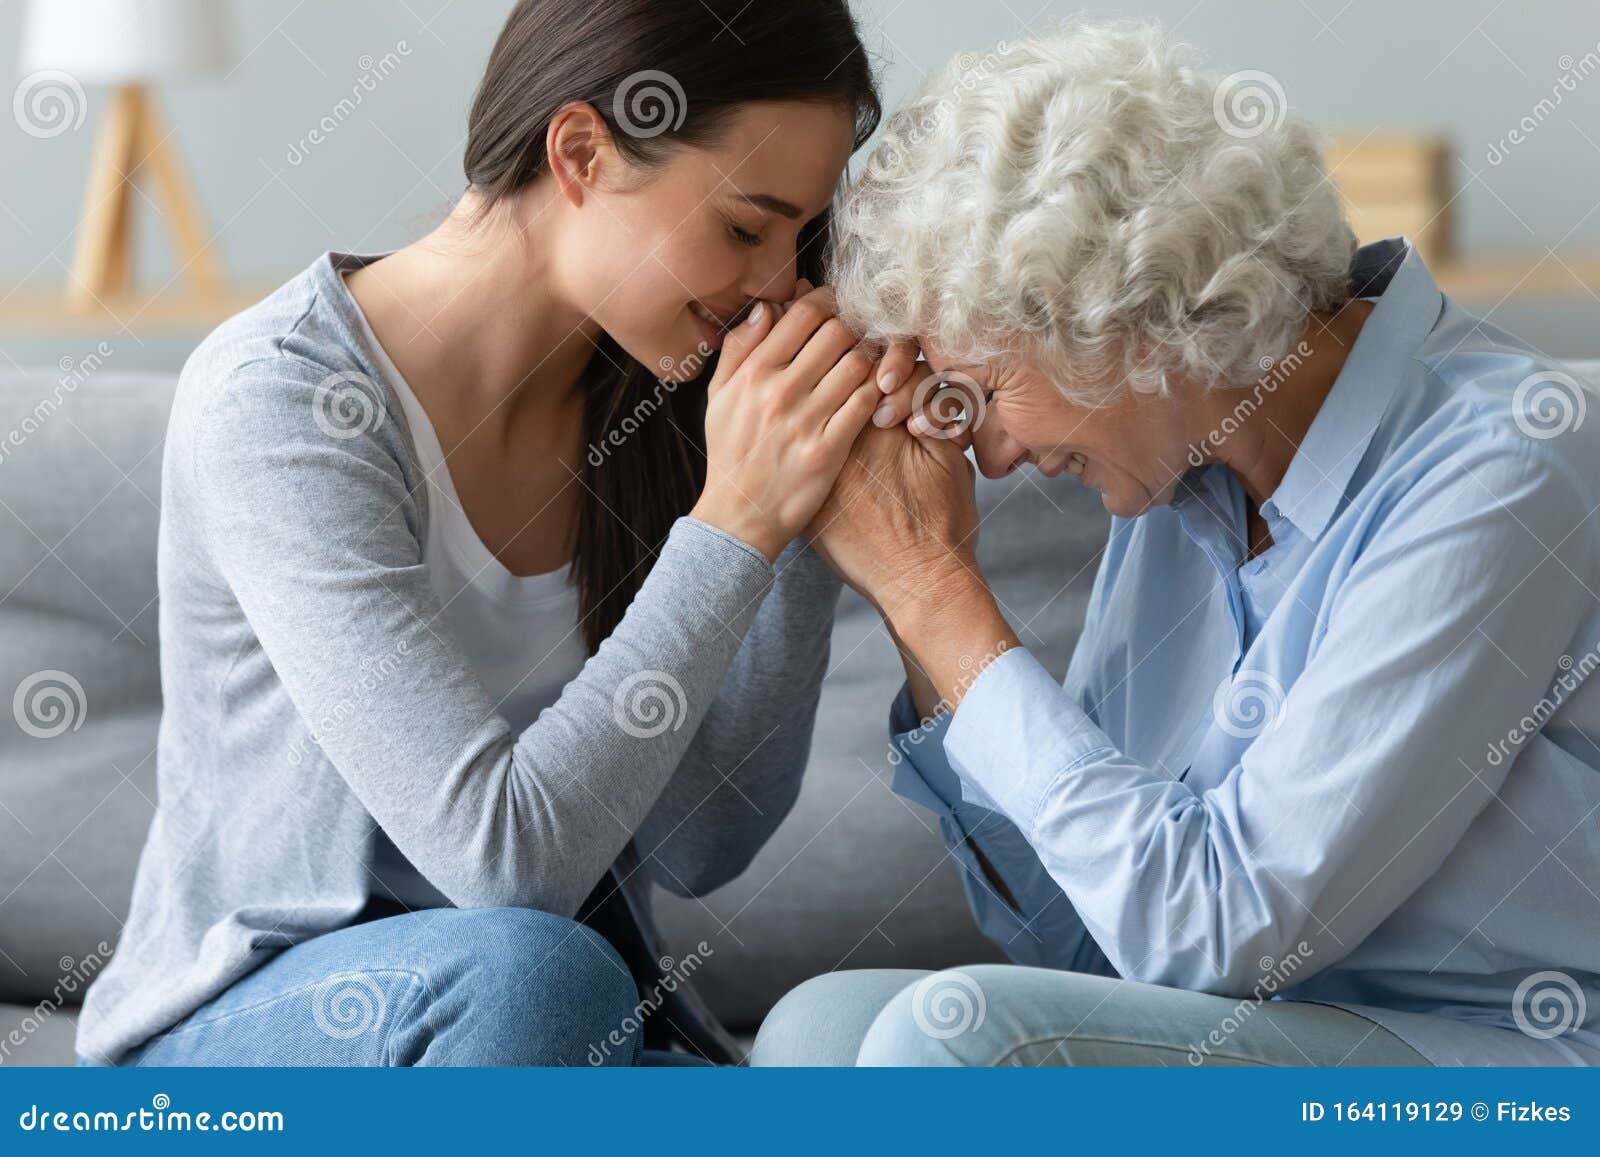 caring young adult woman granddaughter hold hands of old grandmother